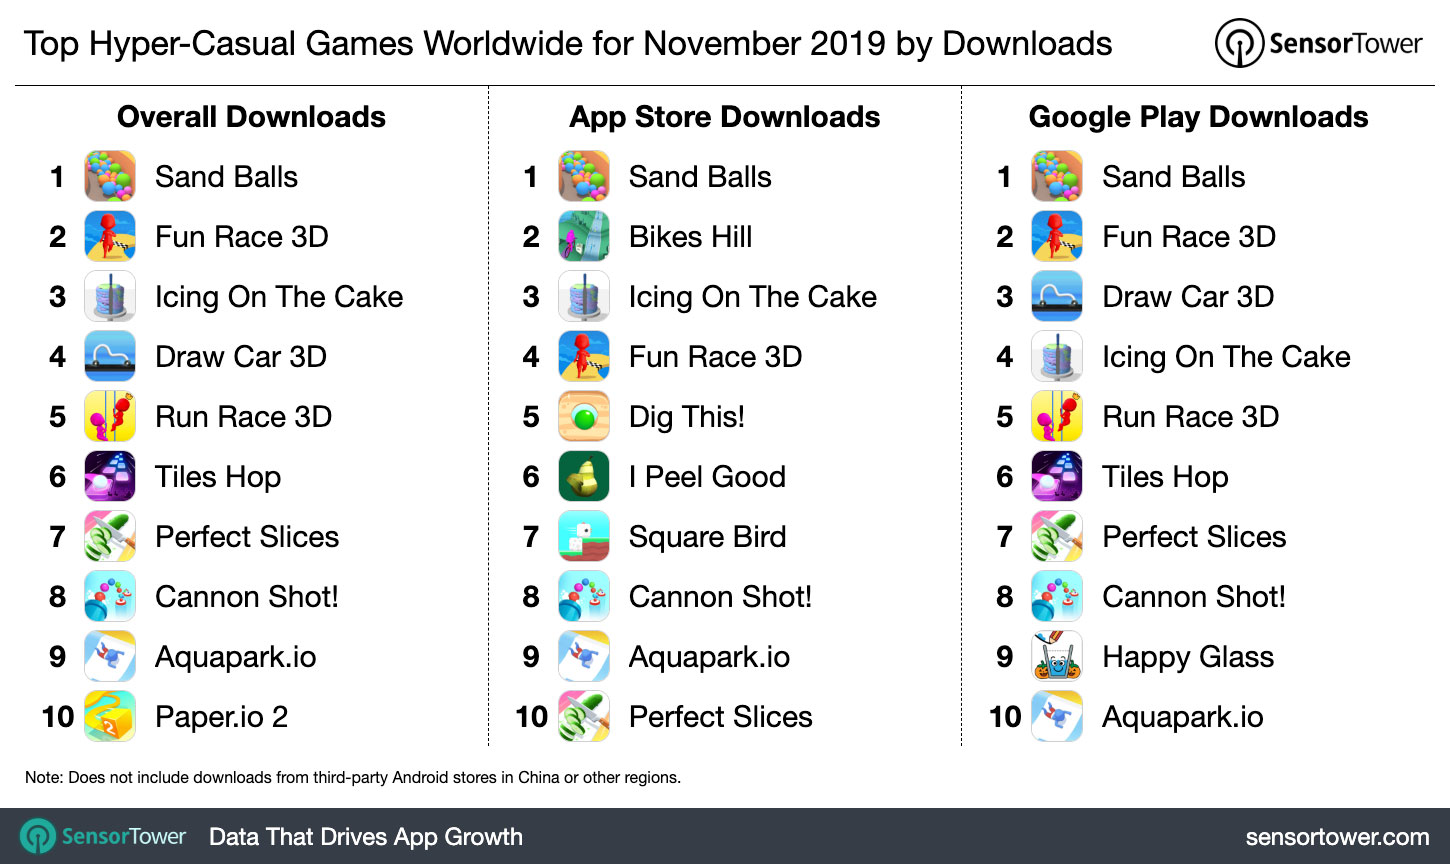 Top Hyper-Casual Games Worldwide for November 2019 by Downloads